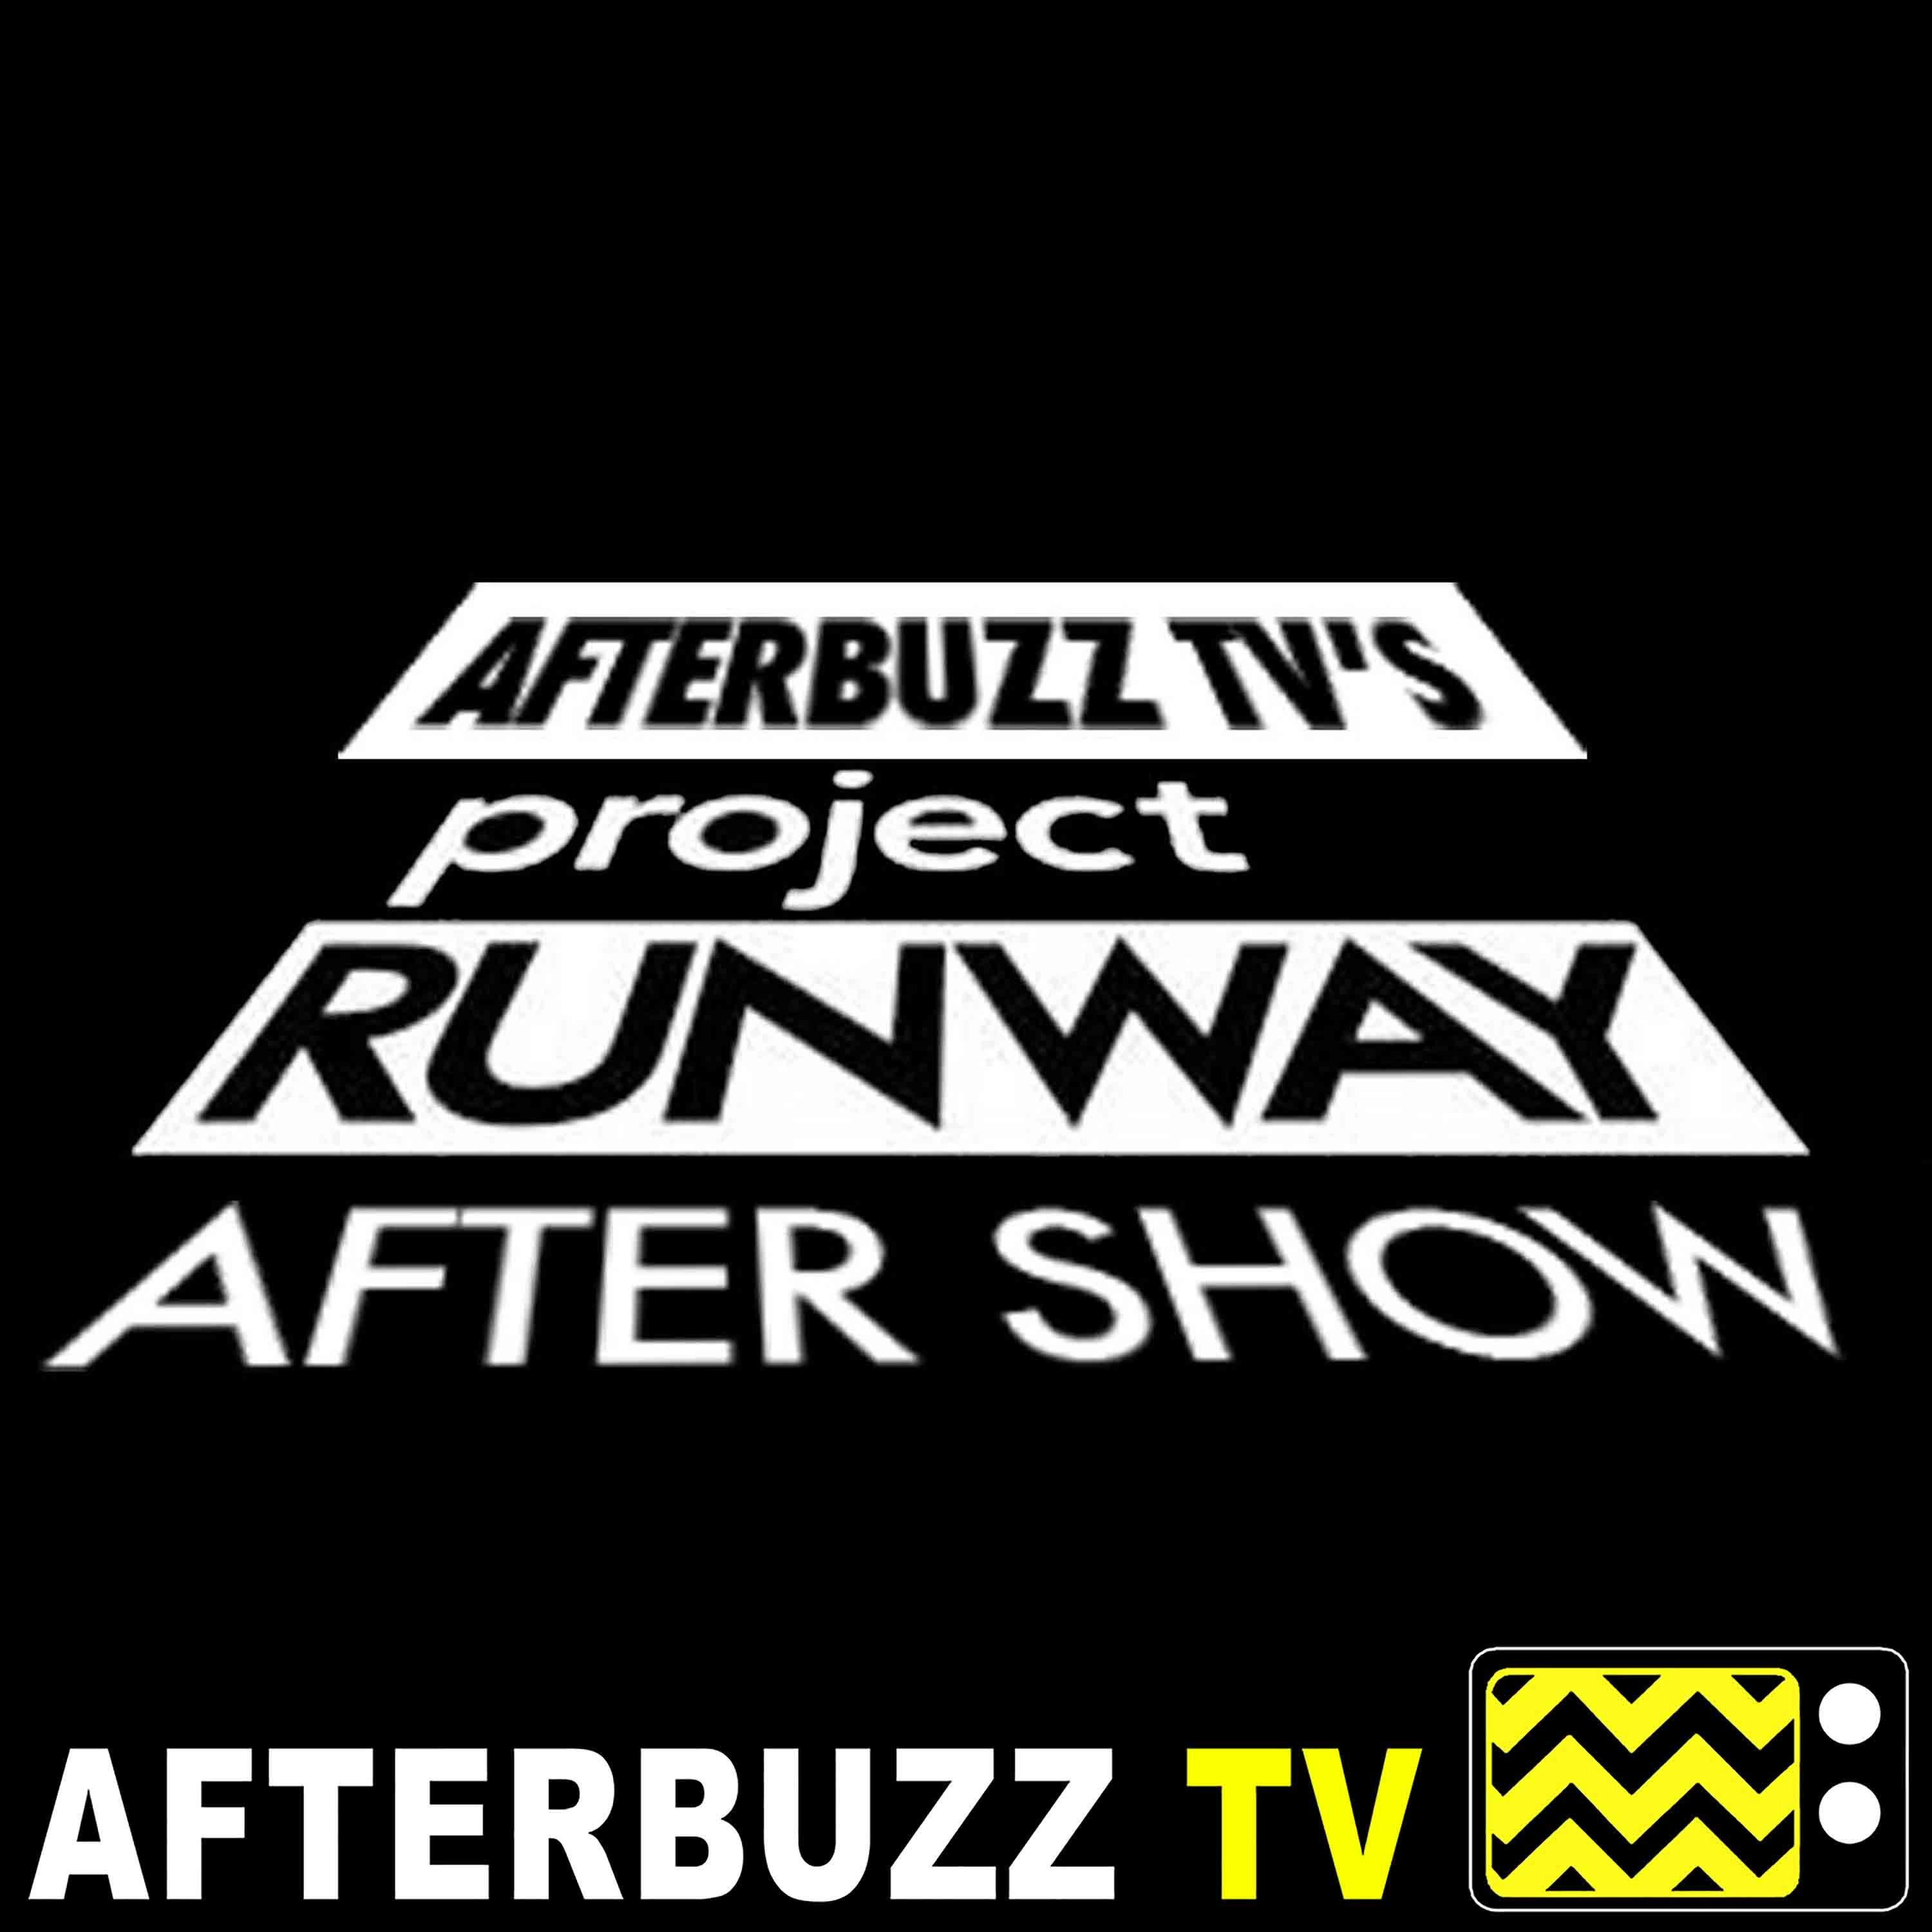 Project Runway All Stars S:6 | Making Fashion History E:13 | AfterBuzz TV AfterShow